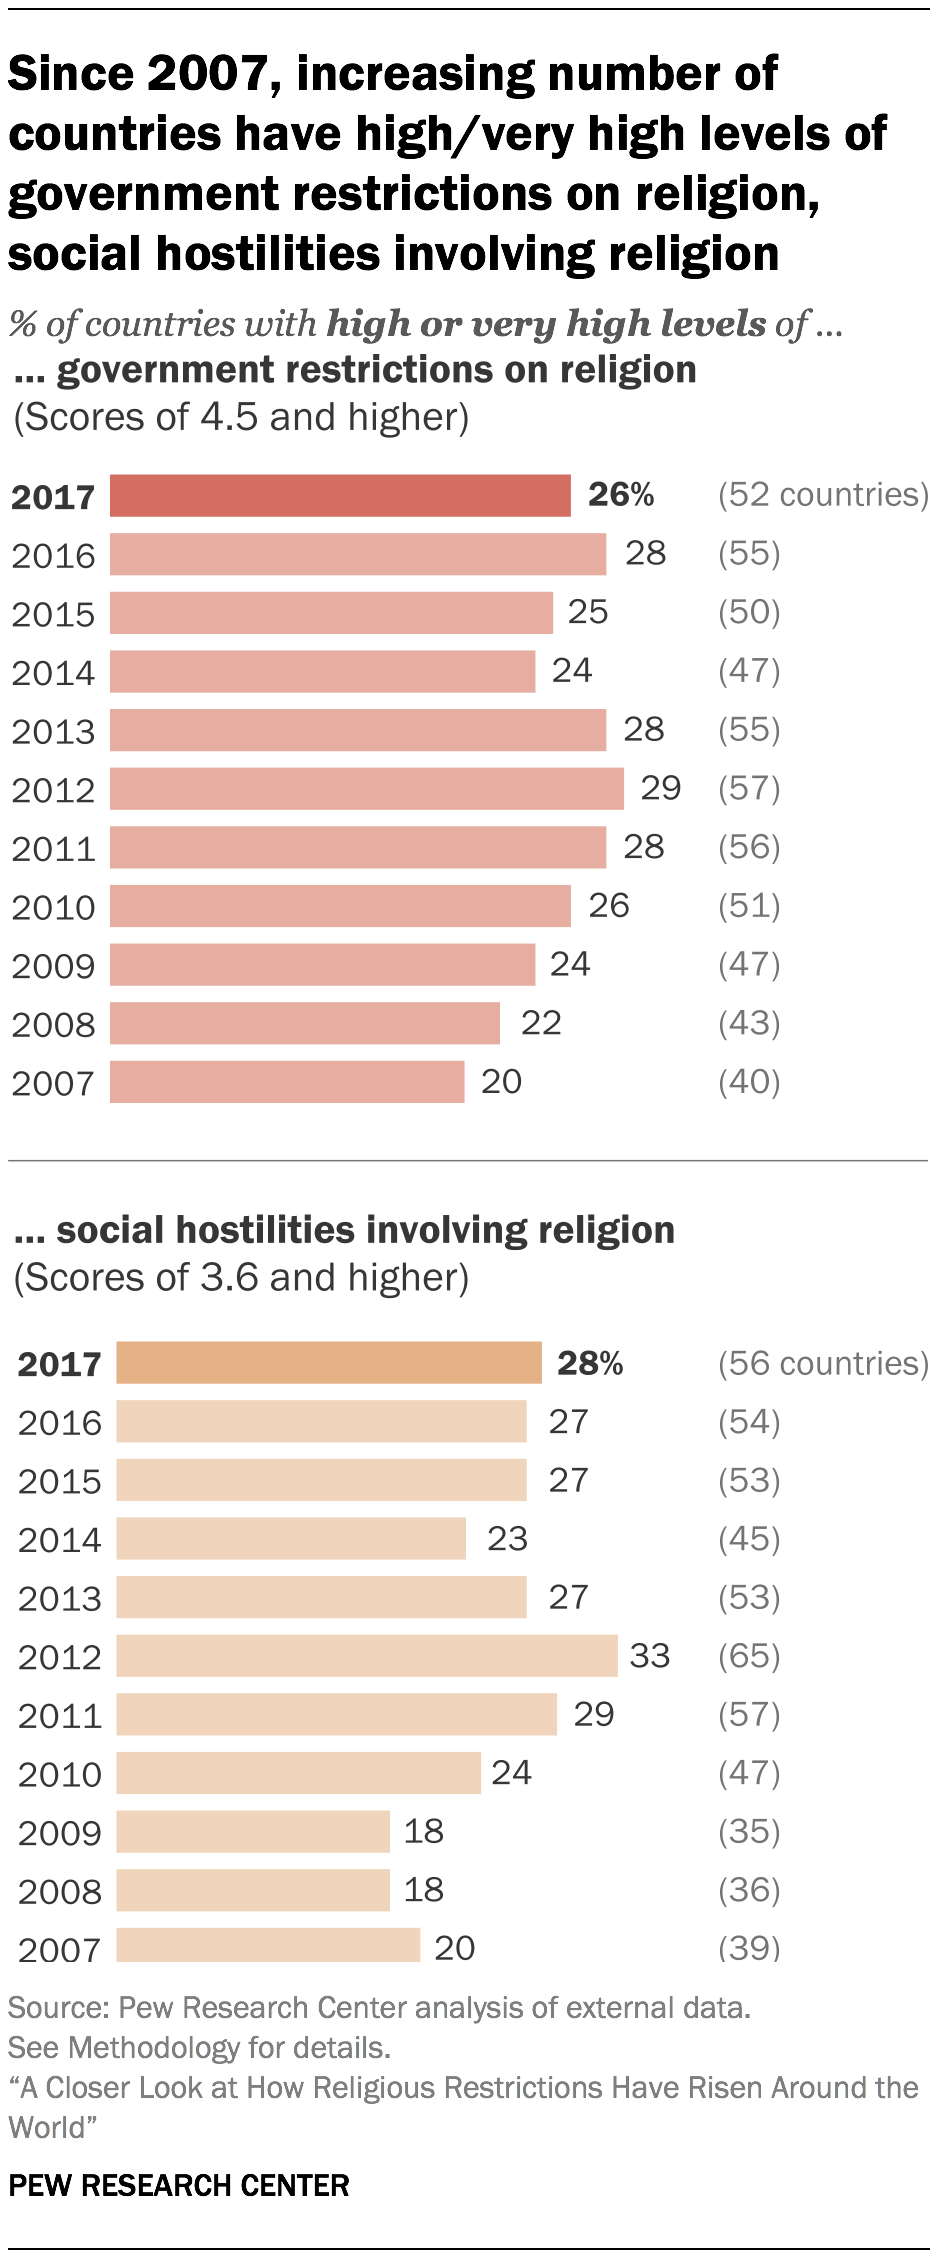 Since 2007, increasing number of countries have high/very high levels of government restrictions on religion, social hostilities involving religion